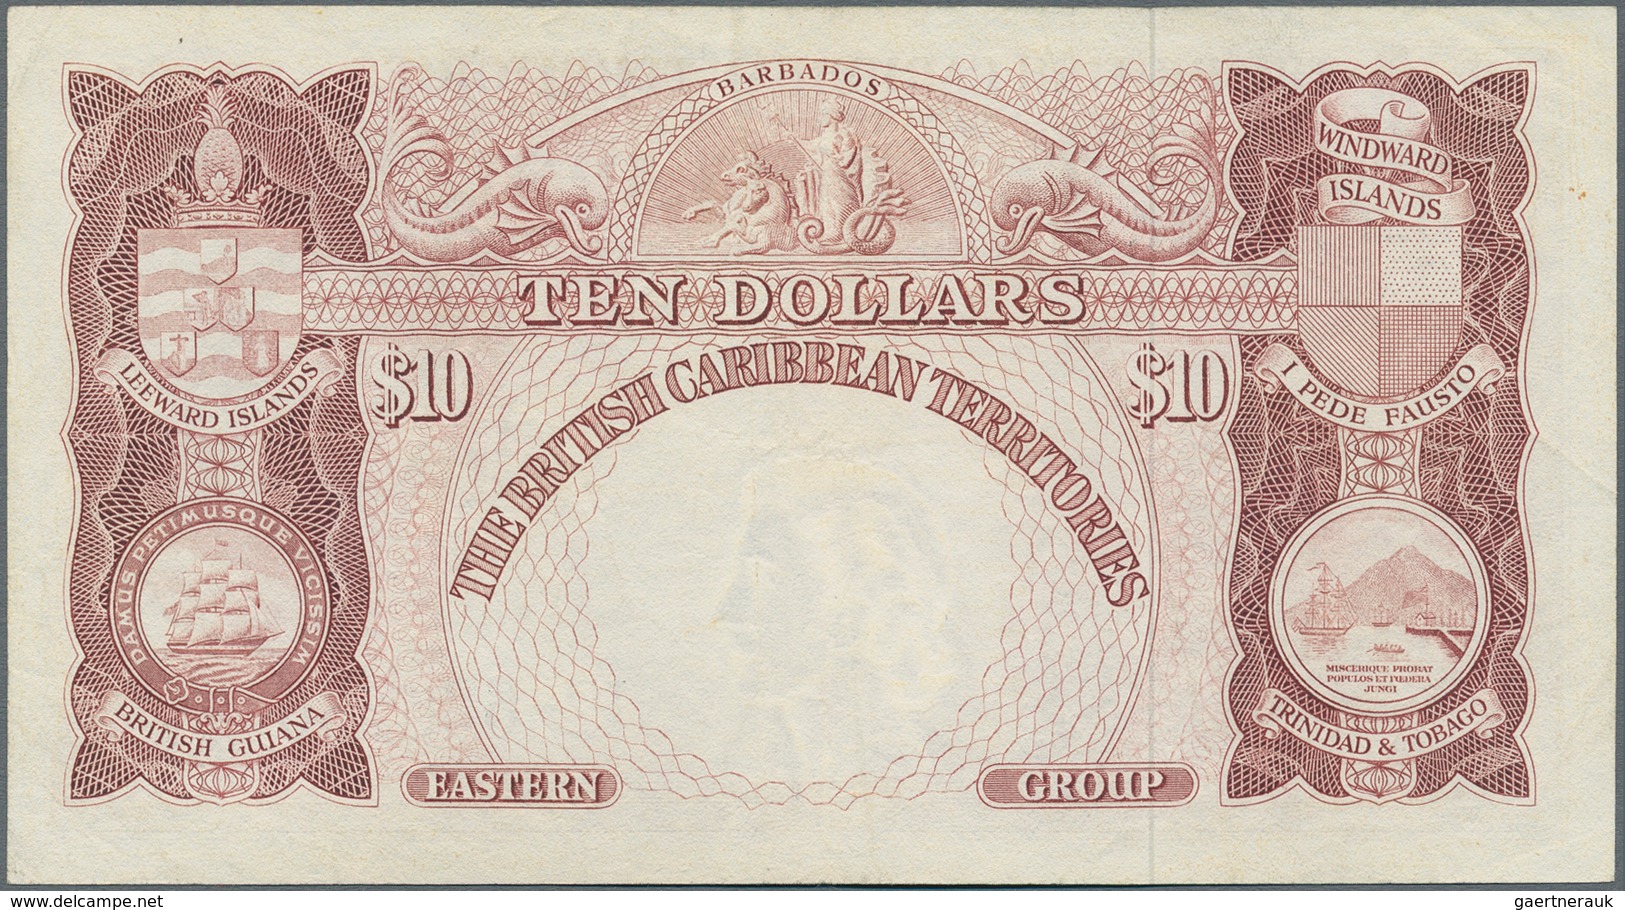 British Caribbean Territories: 10 Dollars January 2nd 1964, P.10c, Key Note Of This Series In Great - Otros – América